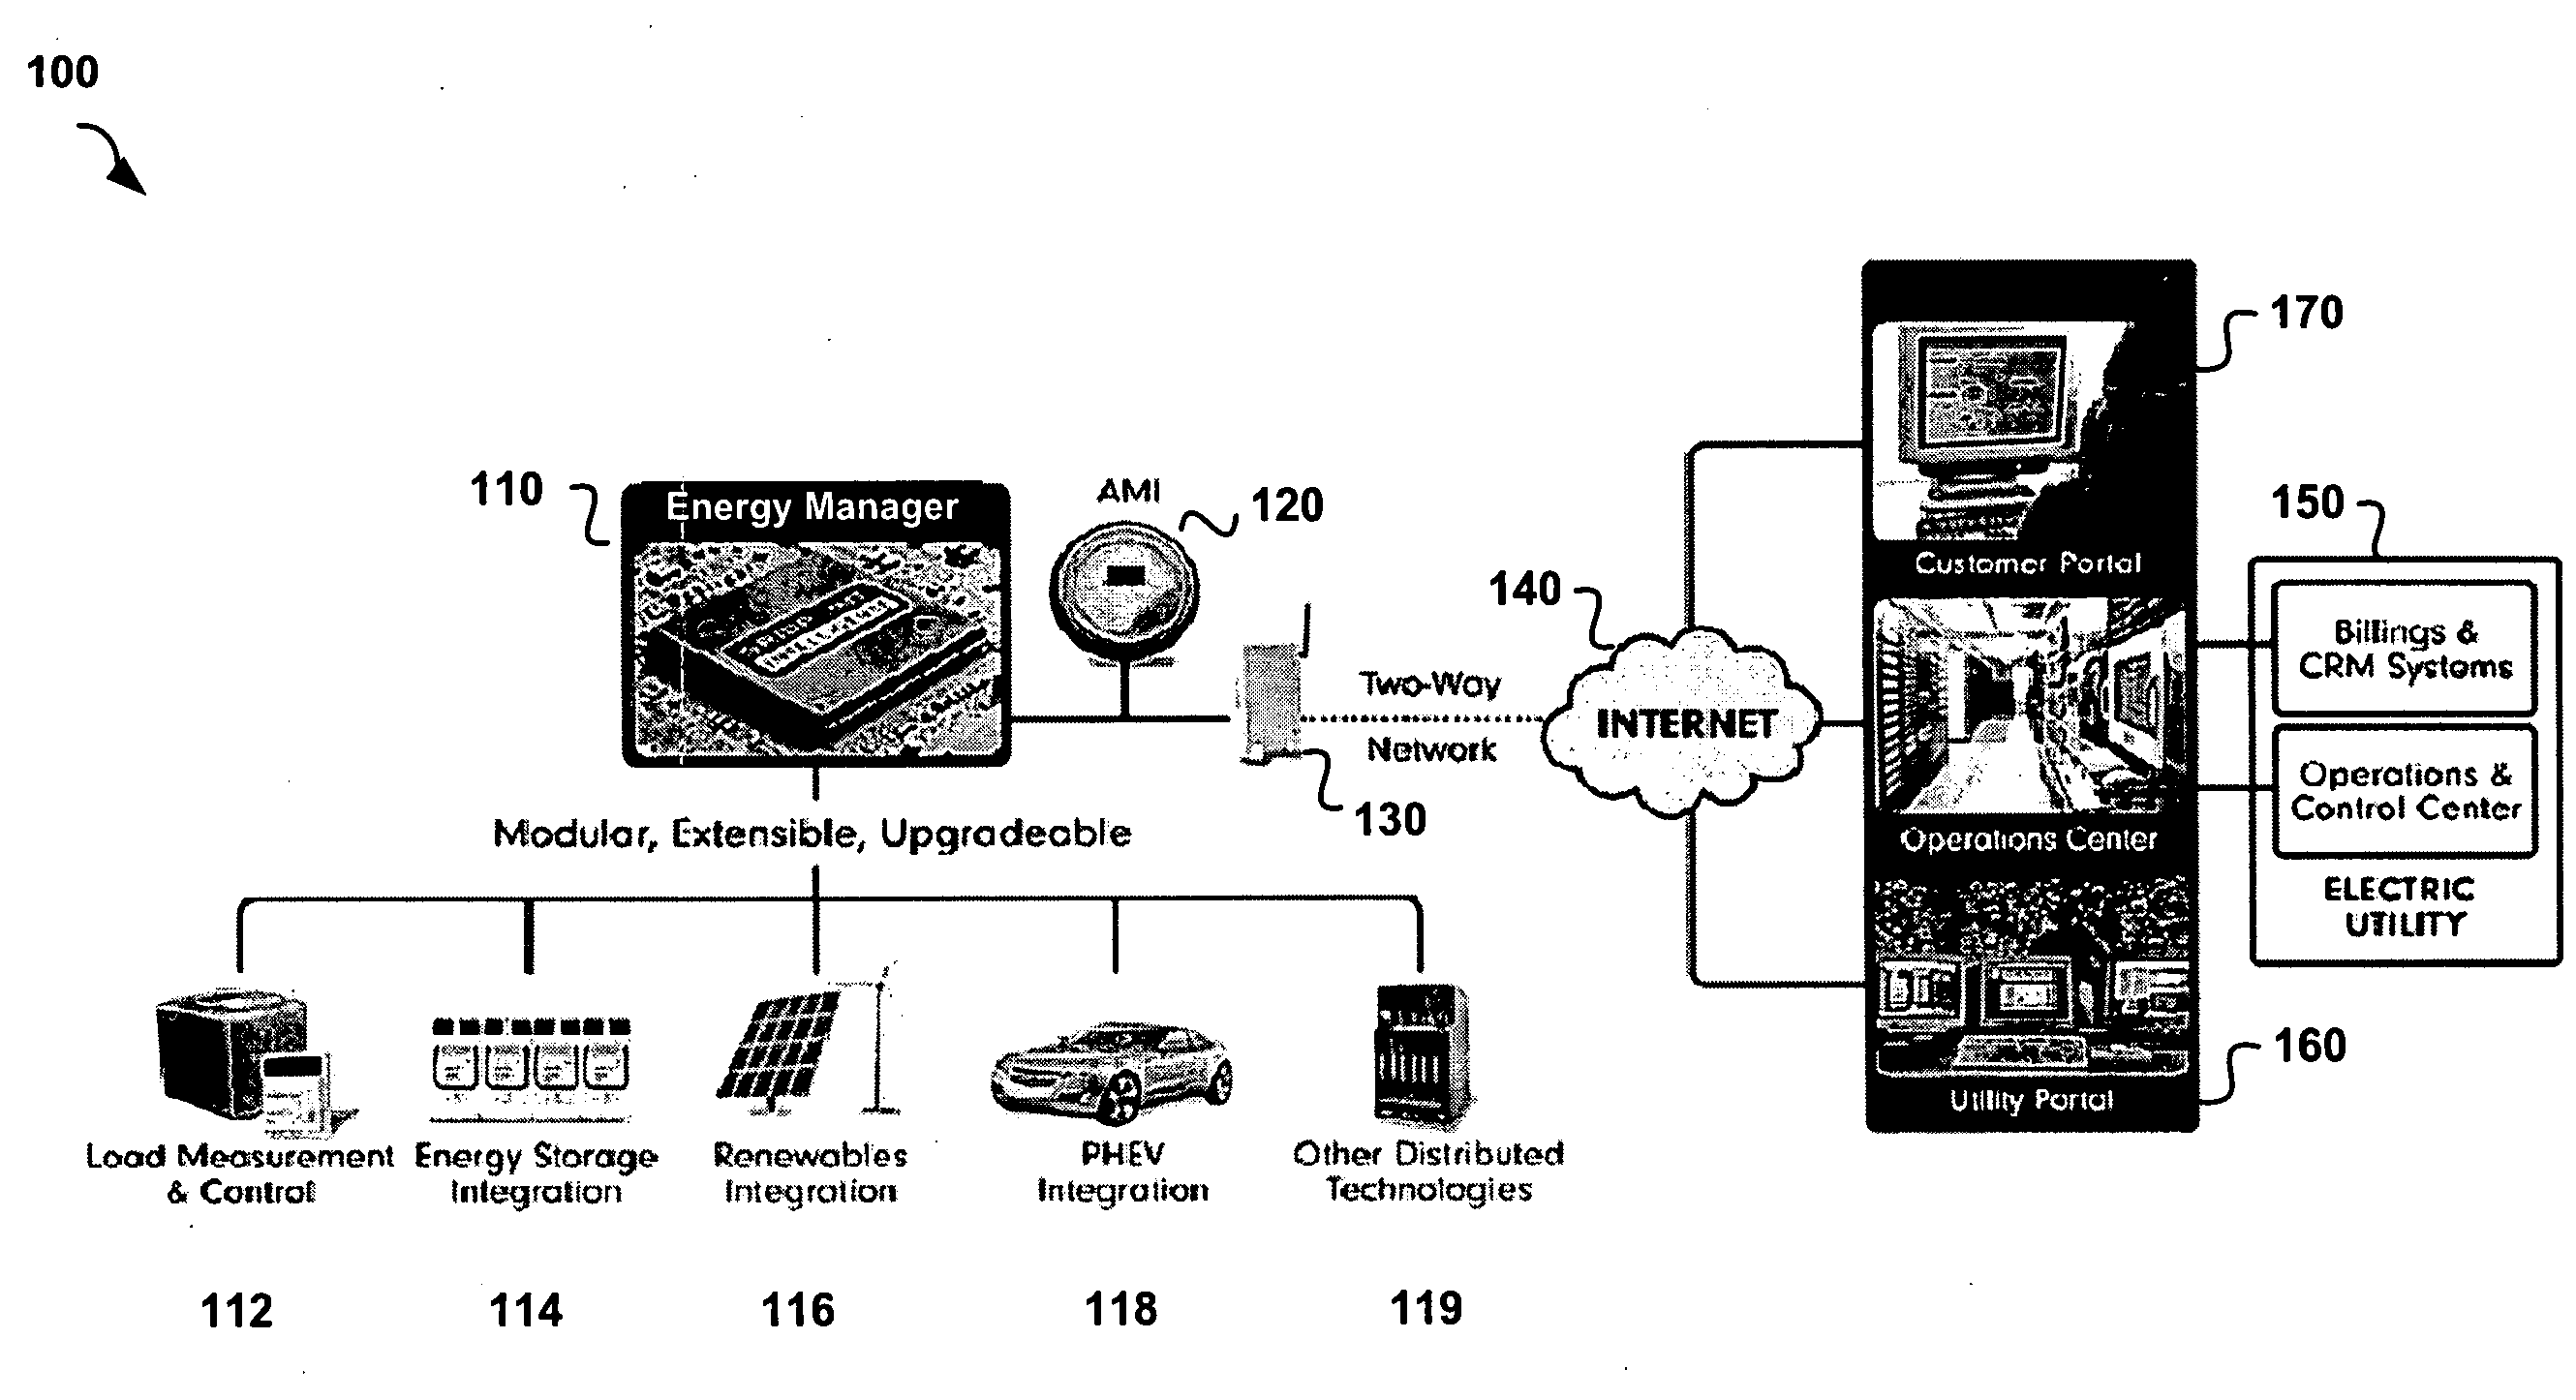 Modular electrical grid interface device